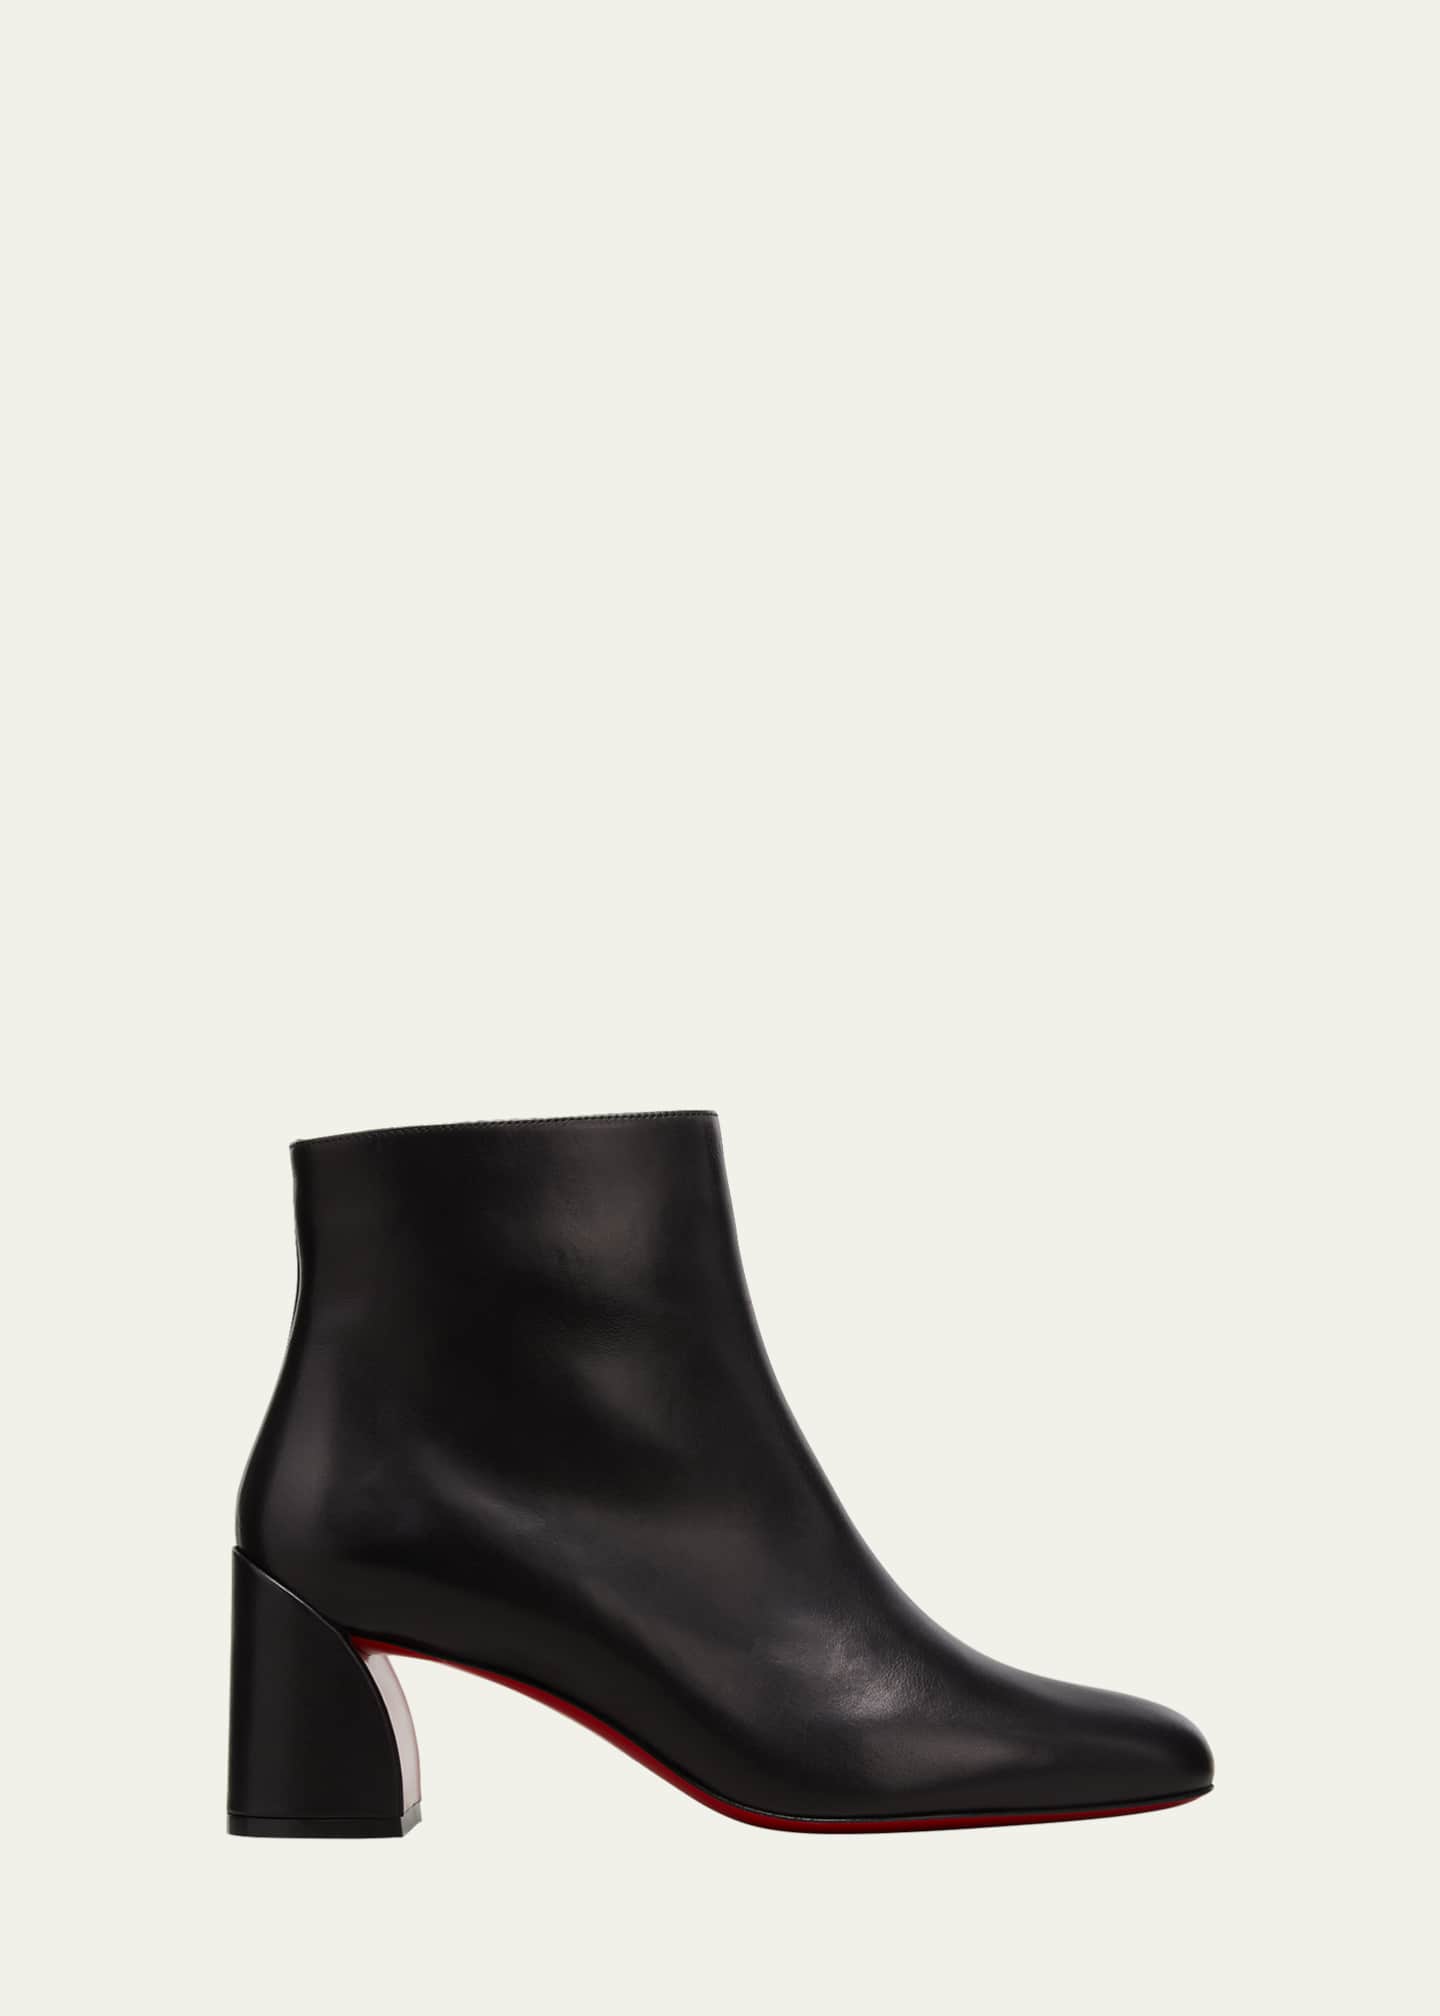 Christian Louboutin Turela Leather Side-Zip Red Sole Booties - Bergdorf ...